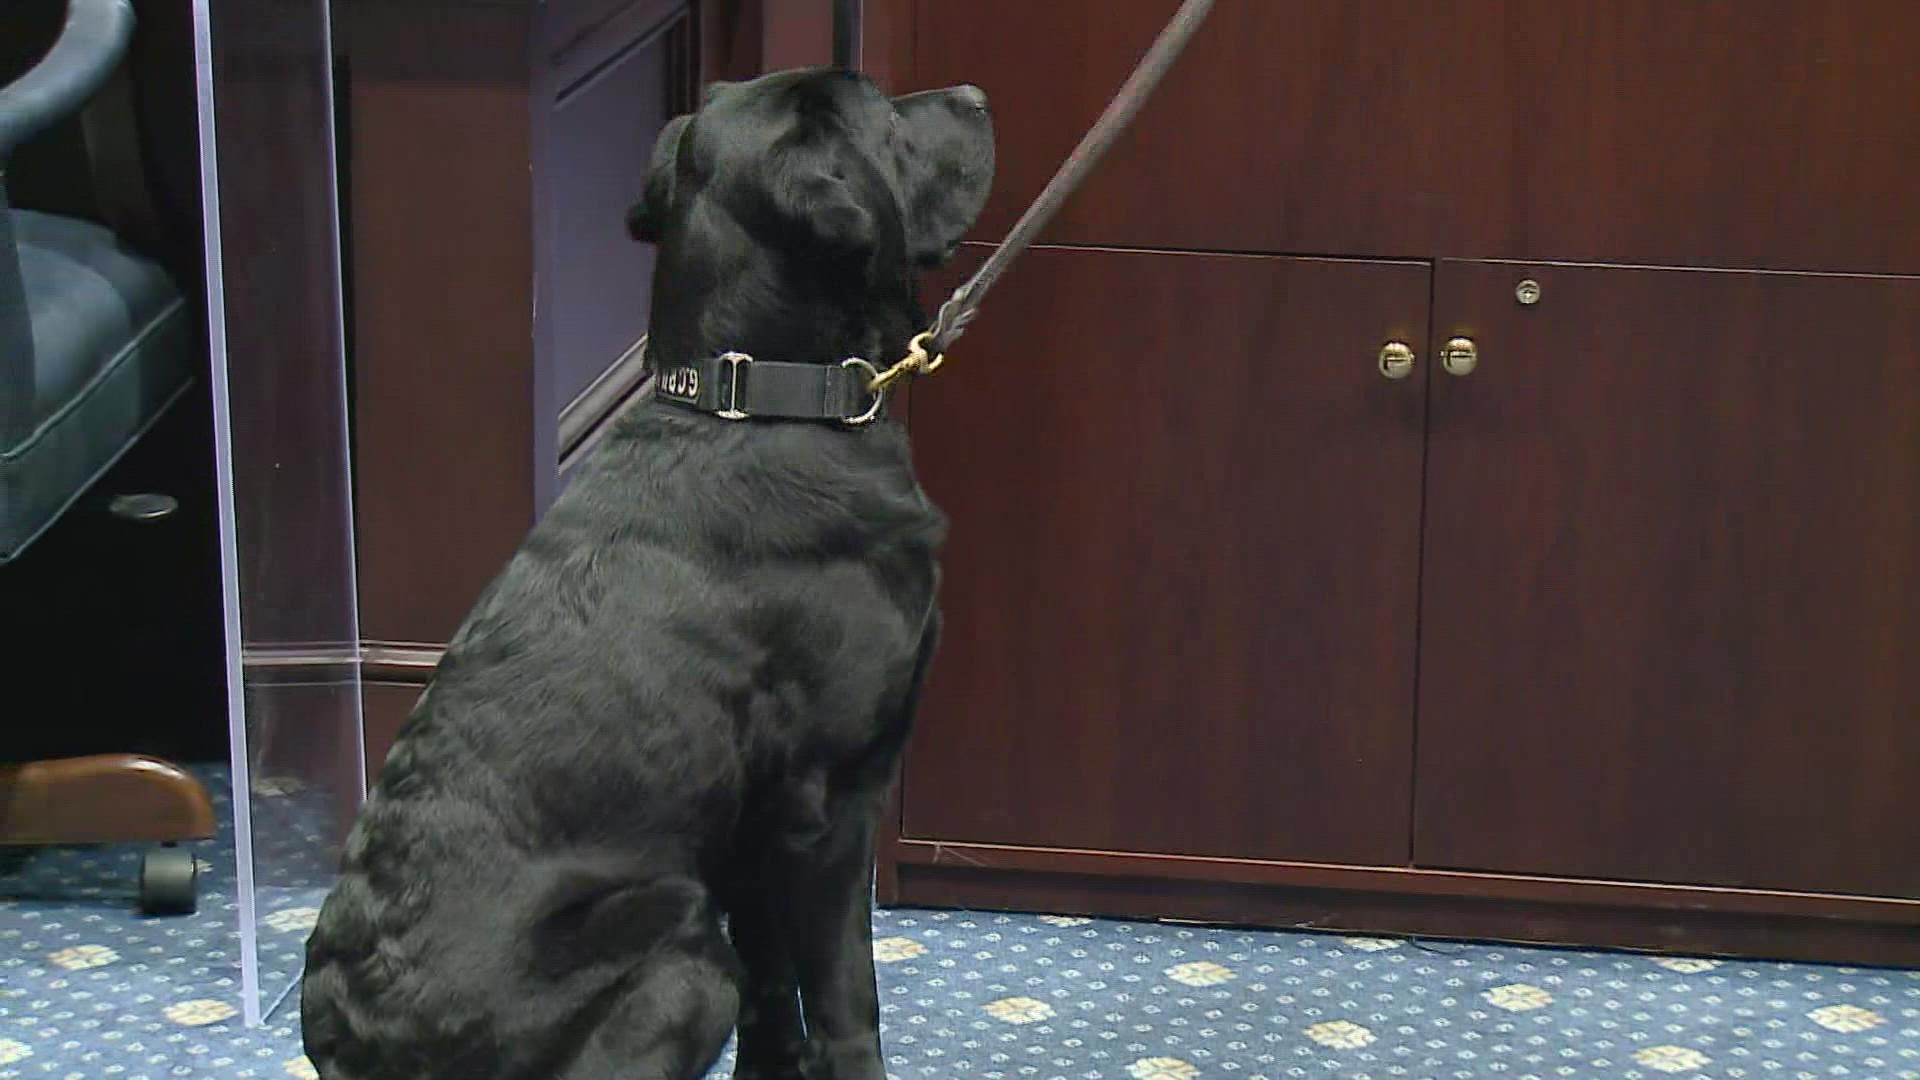 Police K9 Luigi was donated to the Winston-Salem Police Department through the ATF. He is trained to detect 19,000 different explosive odors and components.